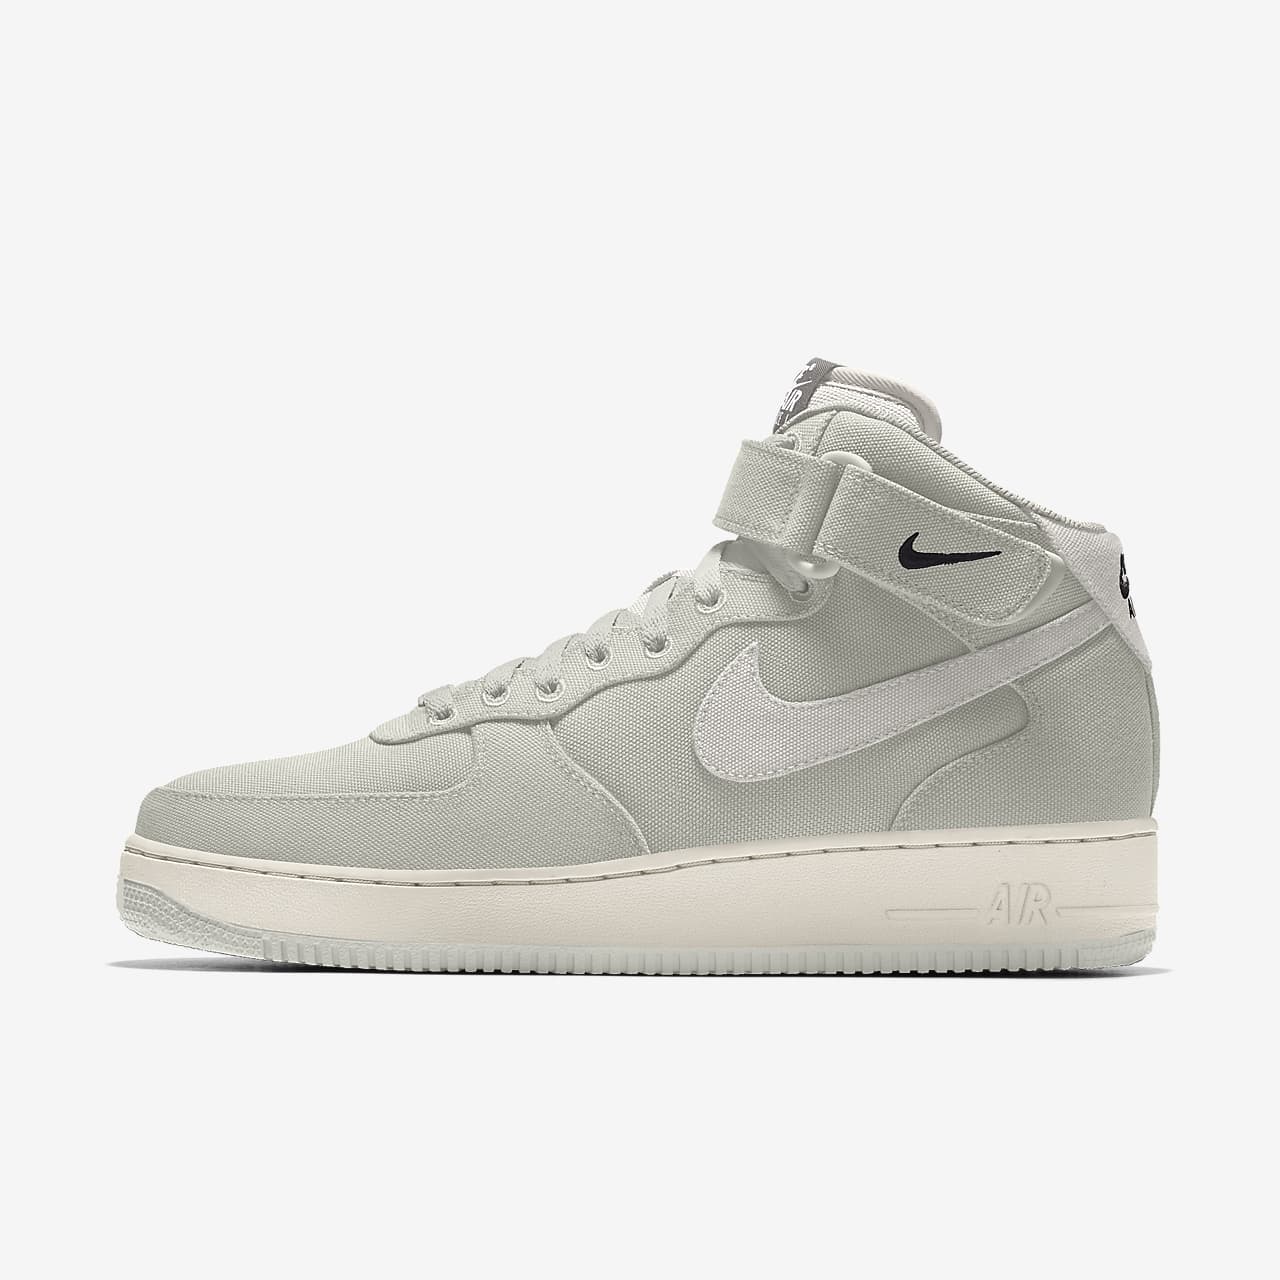 Nike Air Force 1 Mid By You personalisierbarer Damenschuh